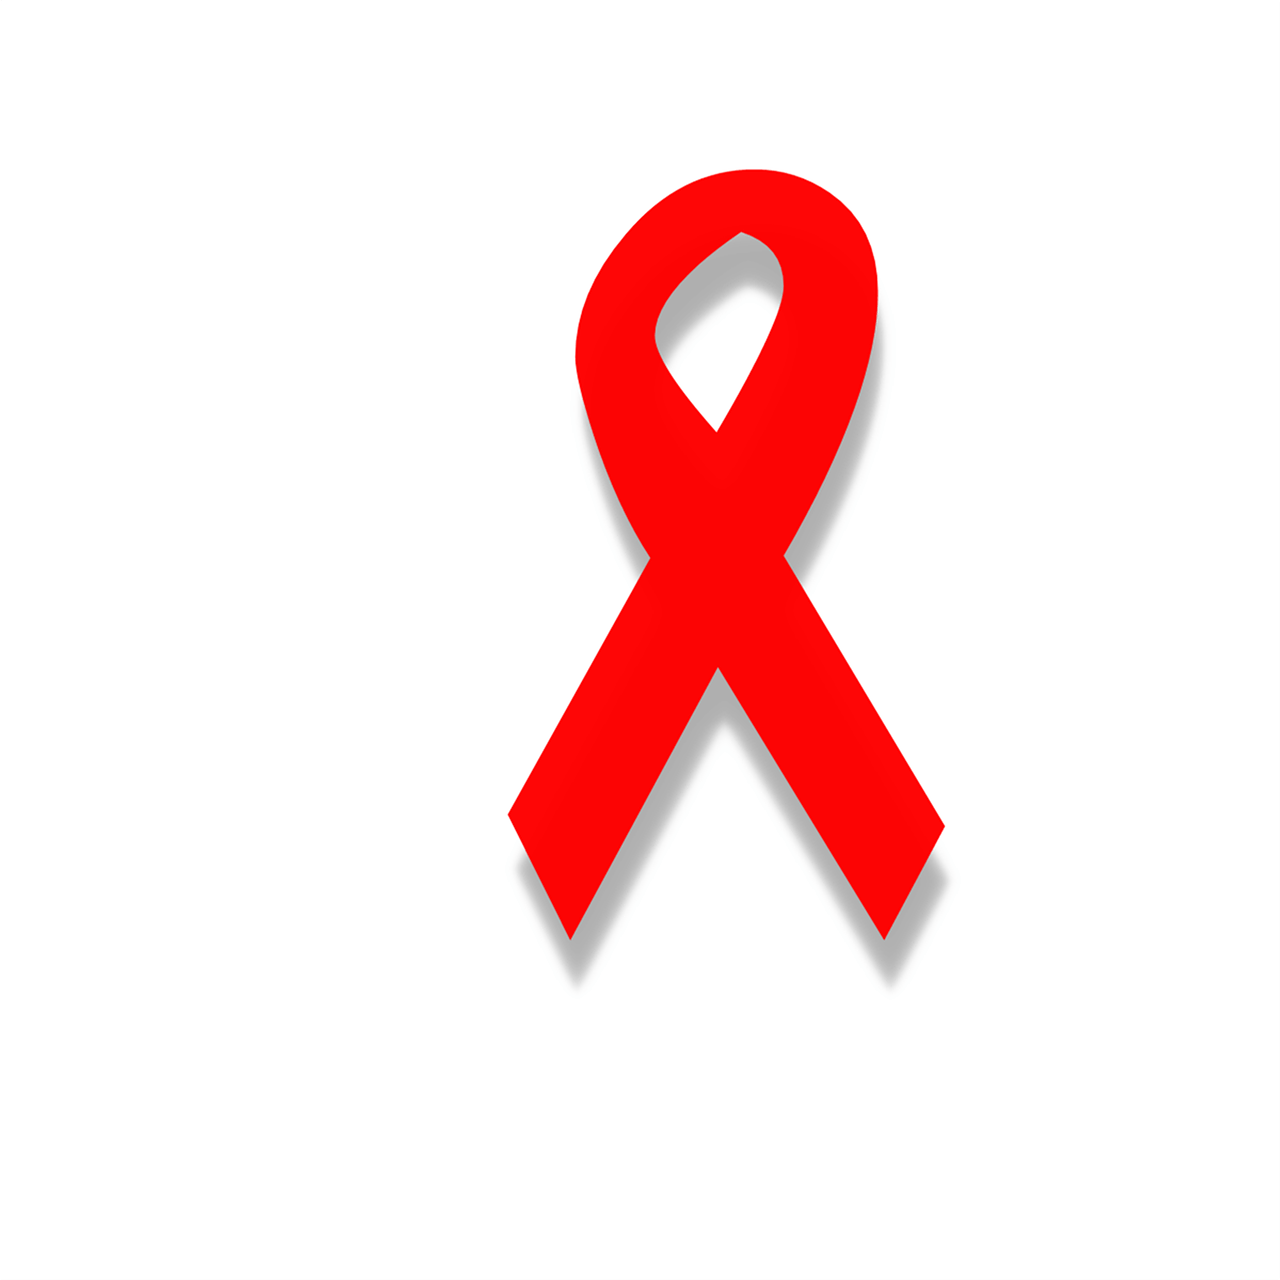 Ribbon Used On Logo - Why is the Red Ribbon used for World AIDS Day and who designed it